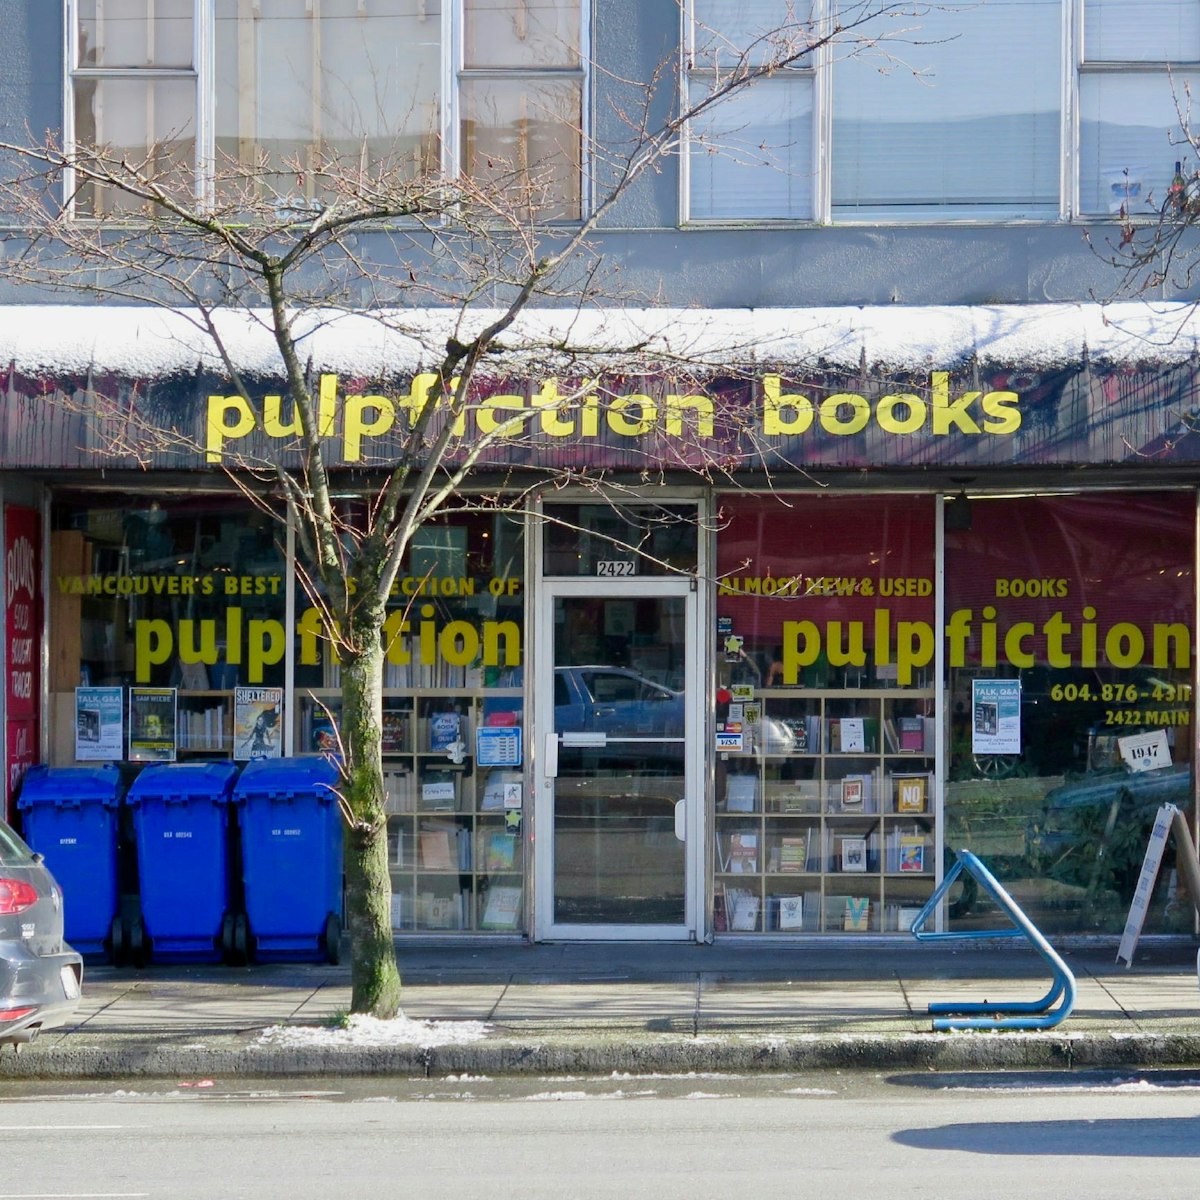 Exterior of the Pulpfiction Books store